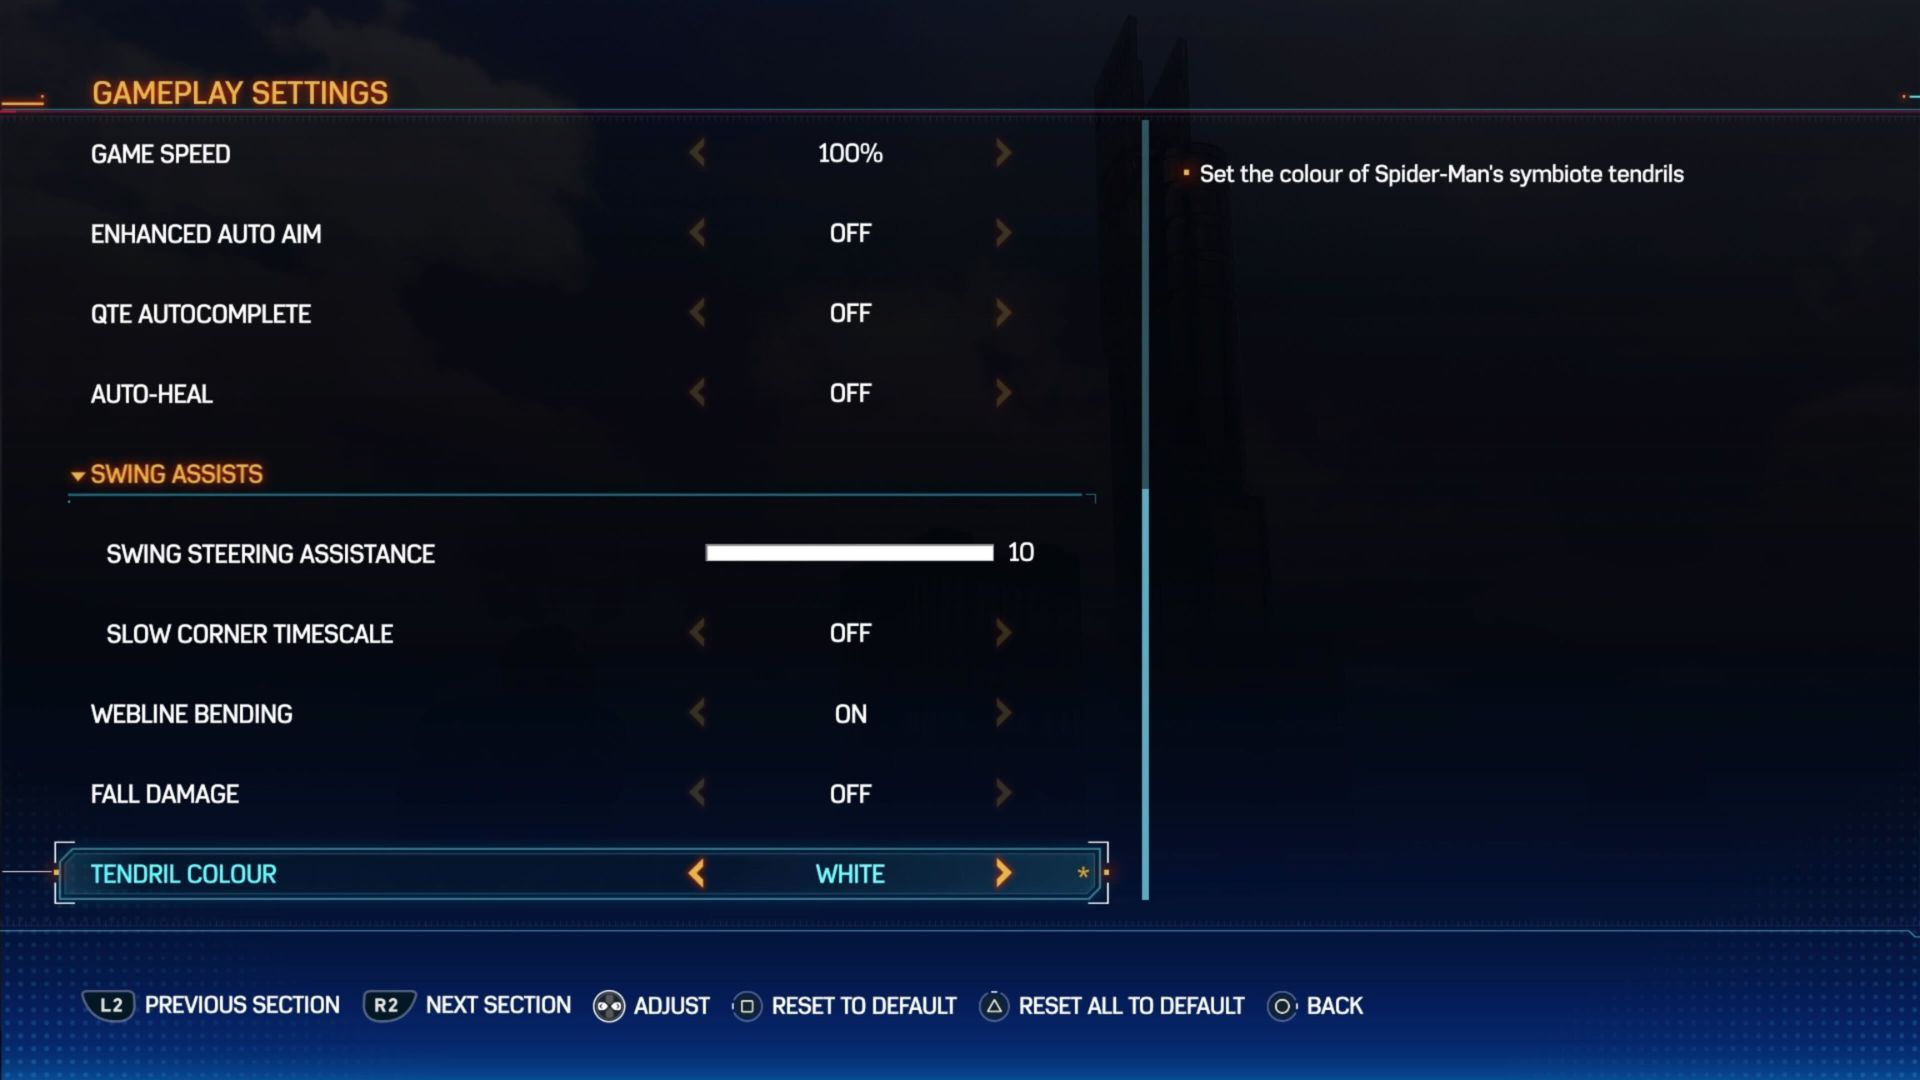 The Gameplay Settings menu from Spider-Man 2, showing the Tendril Colour Option